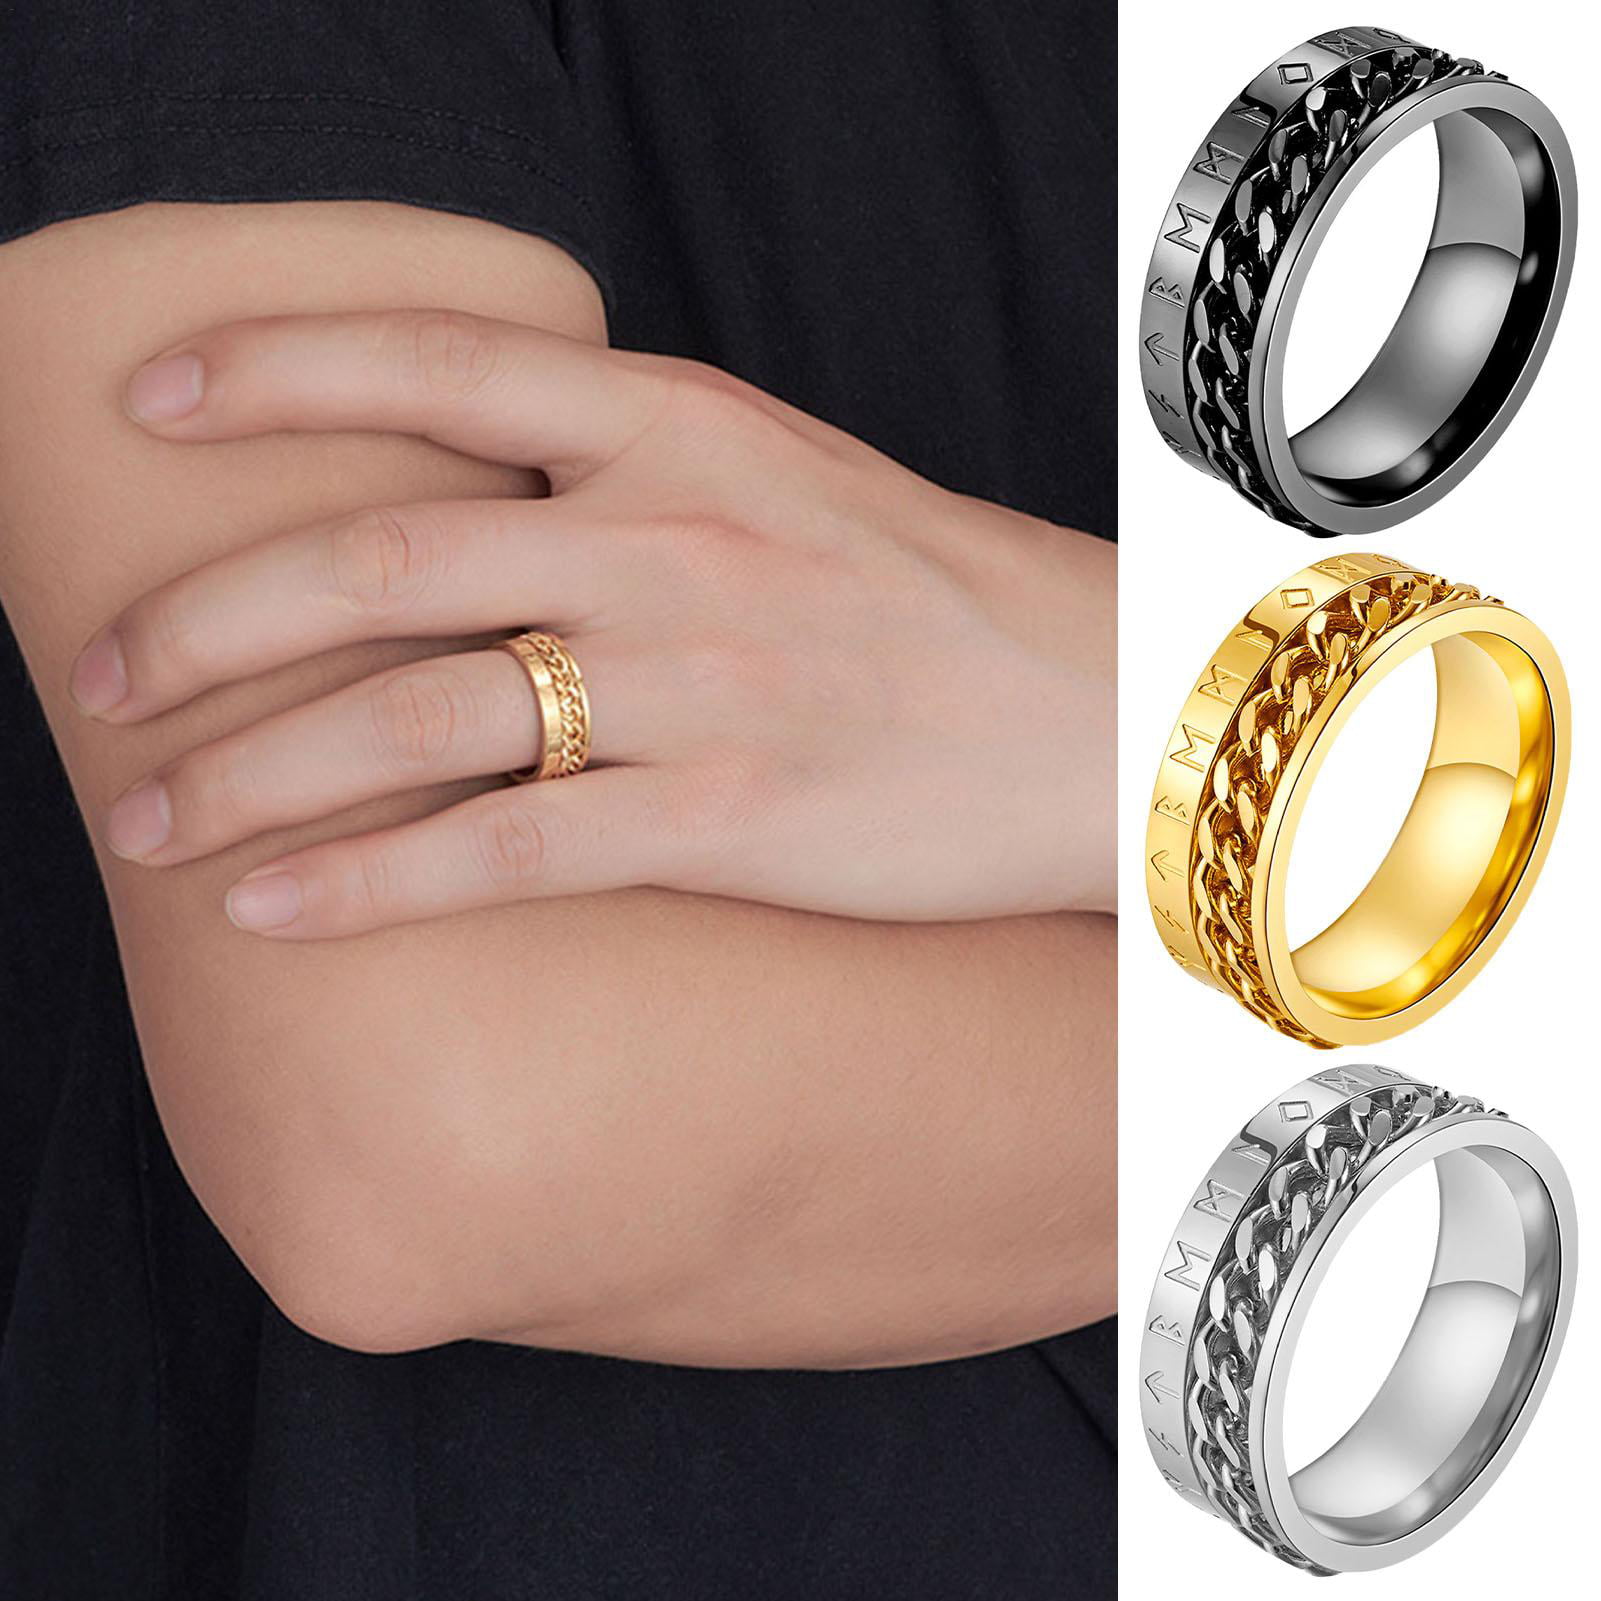 36 Men's SPIN Chain Ring Stainless Steel SPINNER Ring Unisex Quality Cool Rings